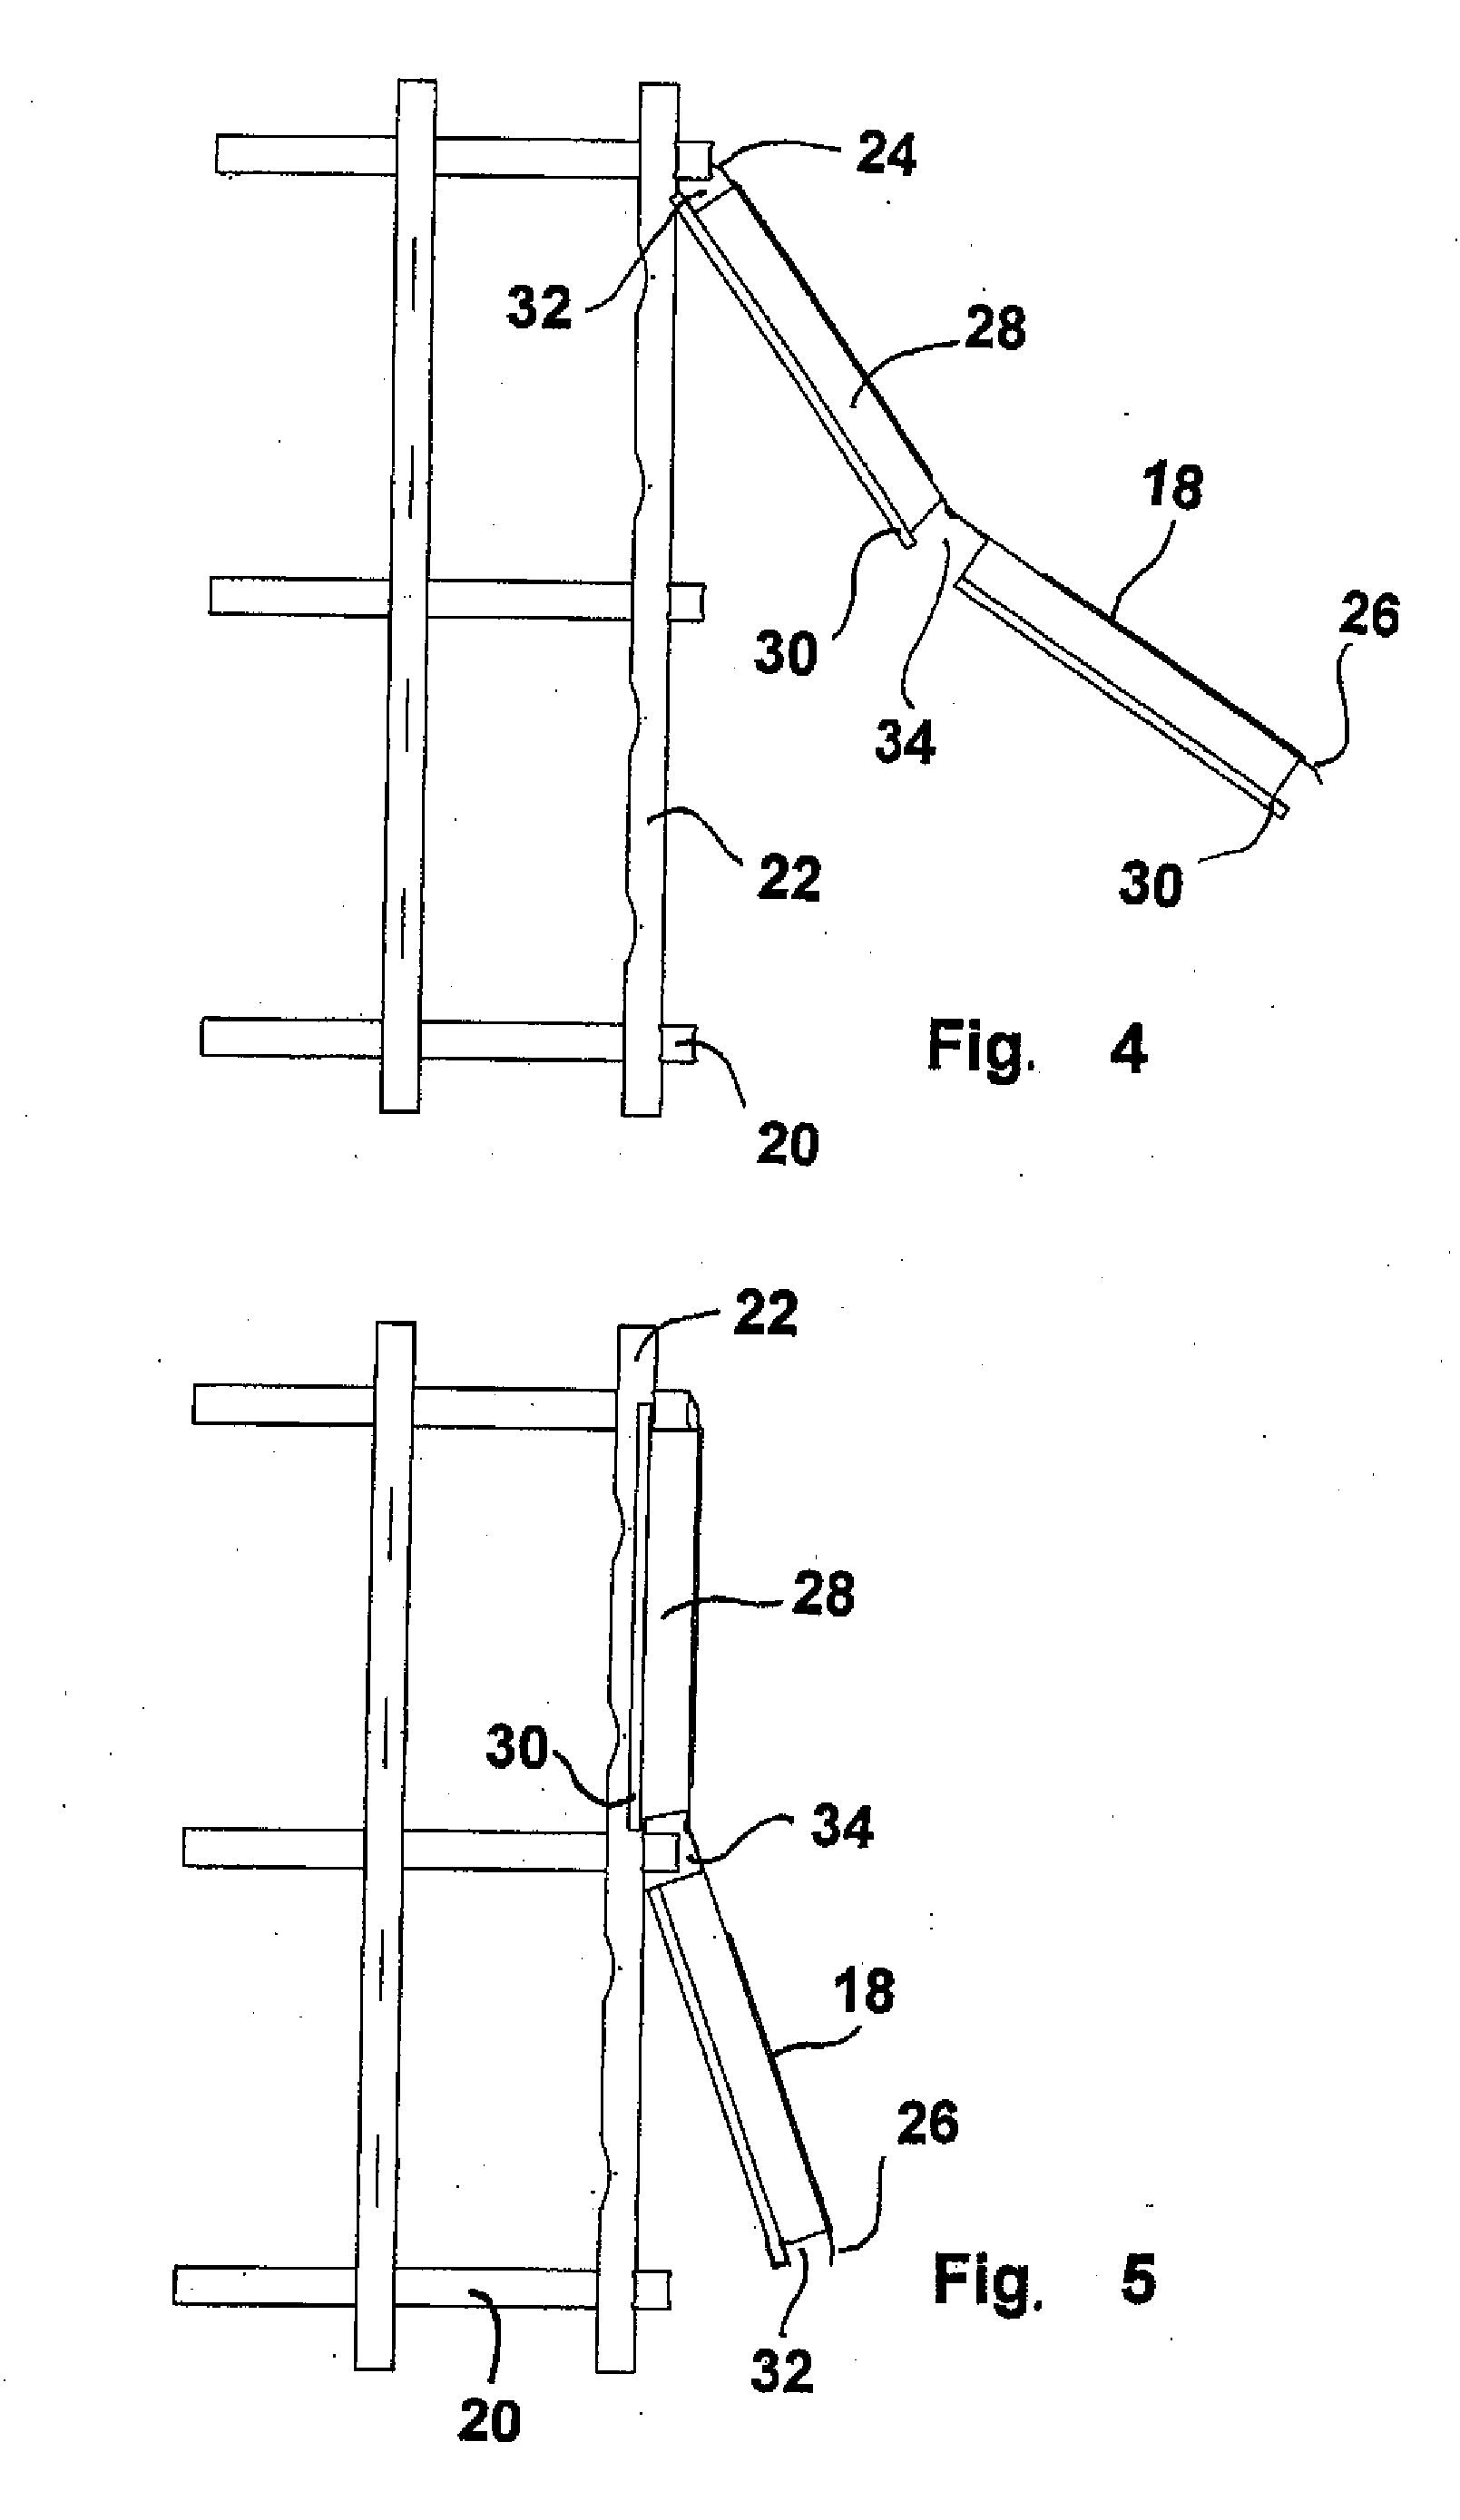 Identification plate for pallet container, and method of attaching an identification plate to a pallet container